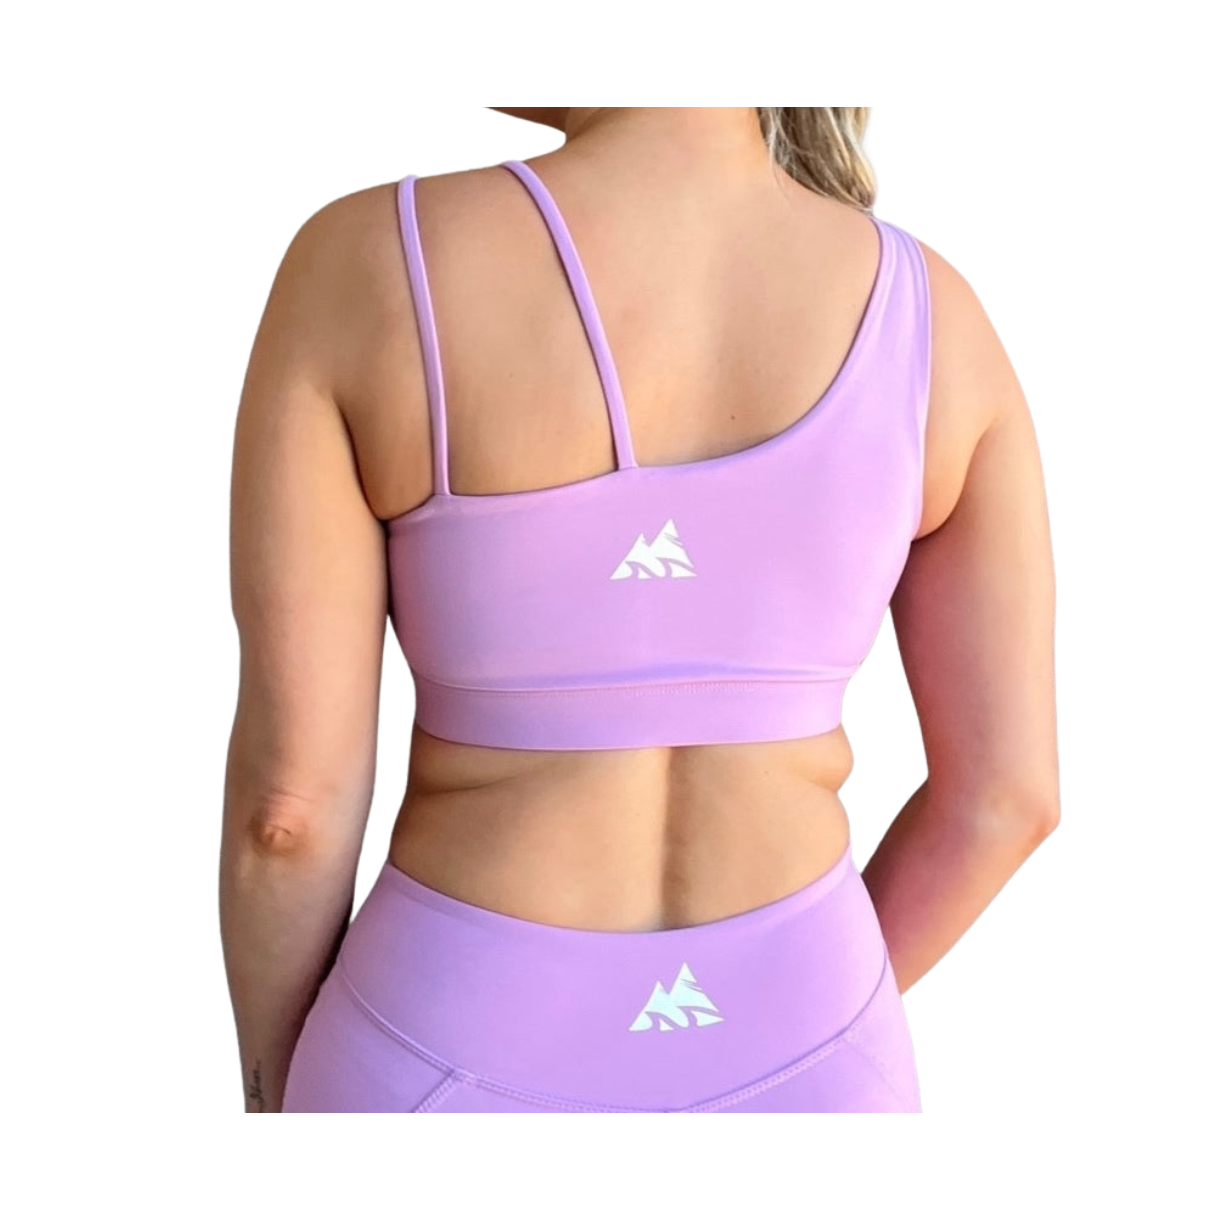 Lavender asymmetrical sports bra with one thick strap and two thinner straps